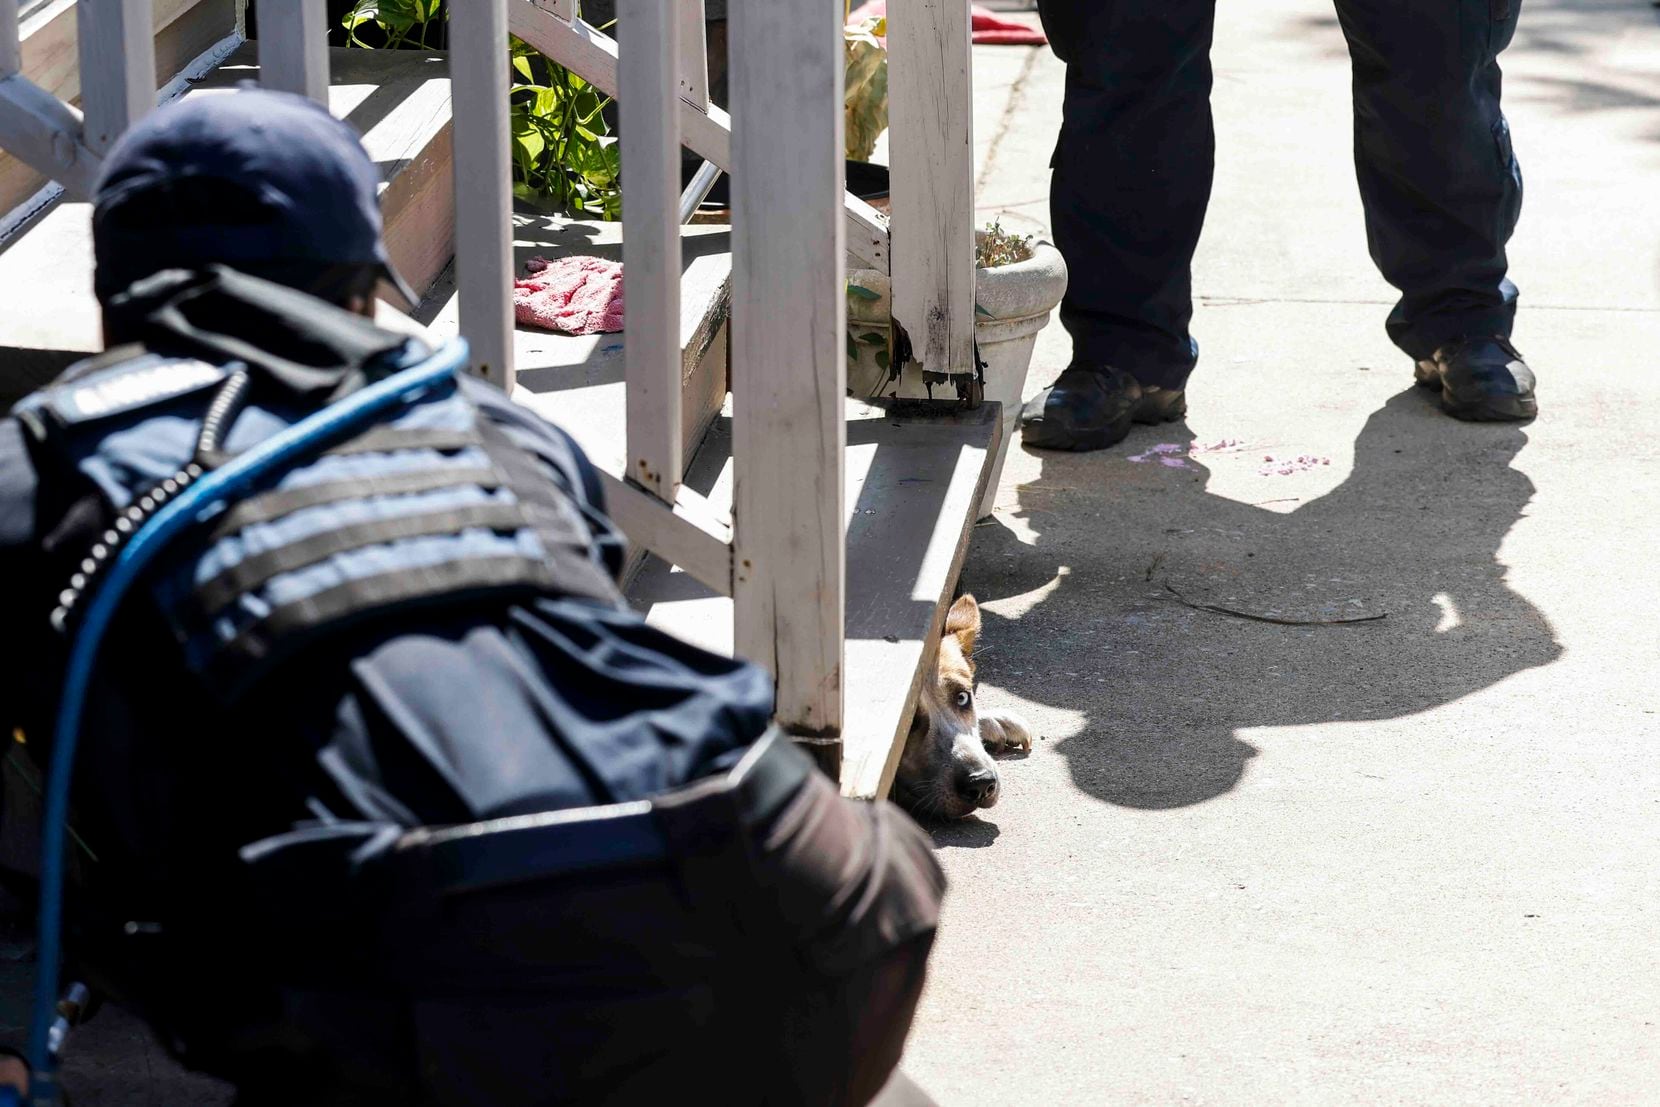 Dallas Animal Services officer LaDonte Williams, left, and Reid Koenig attend to a loose dog...